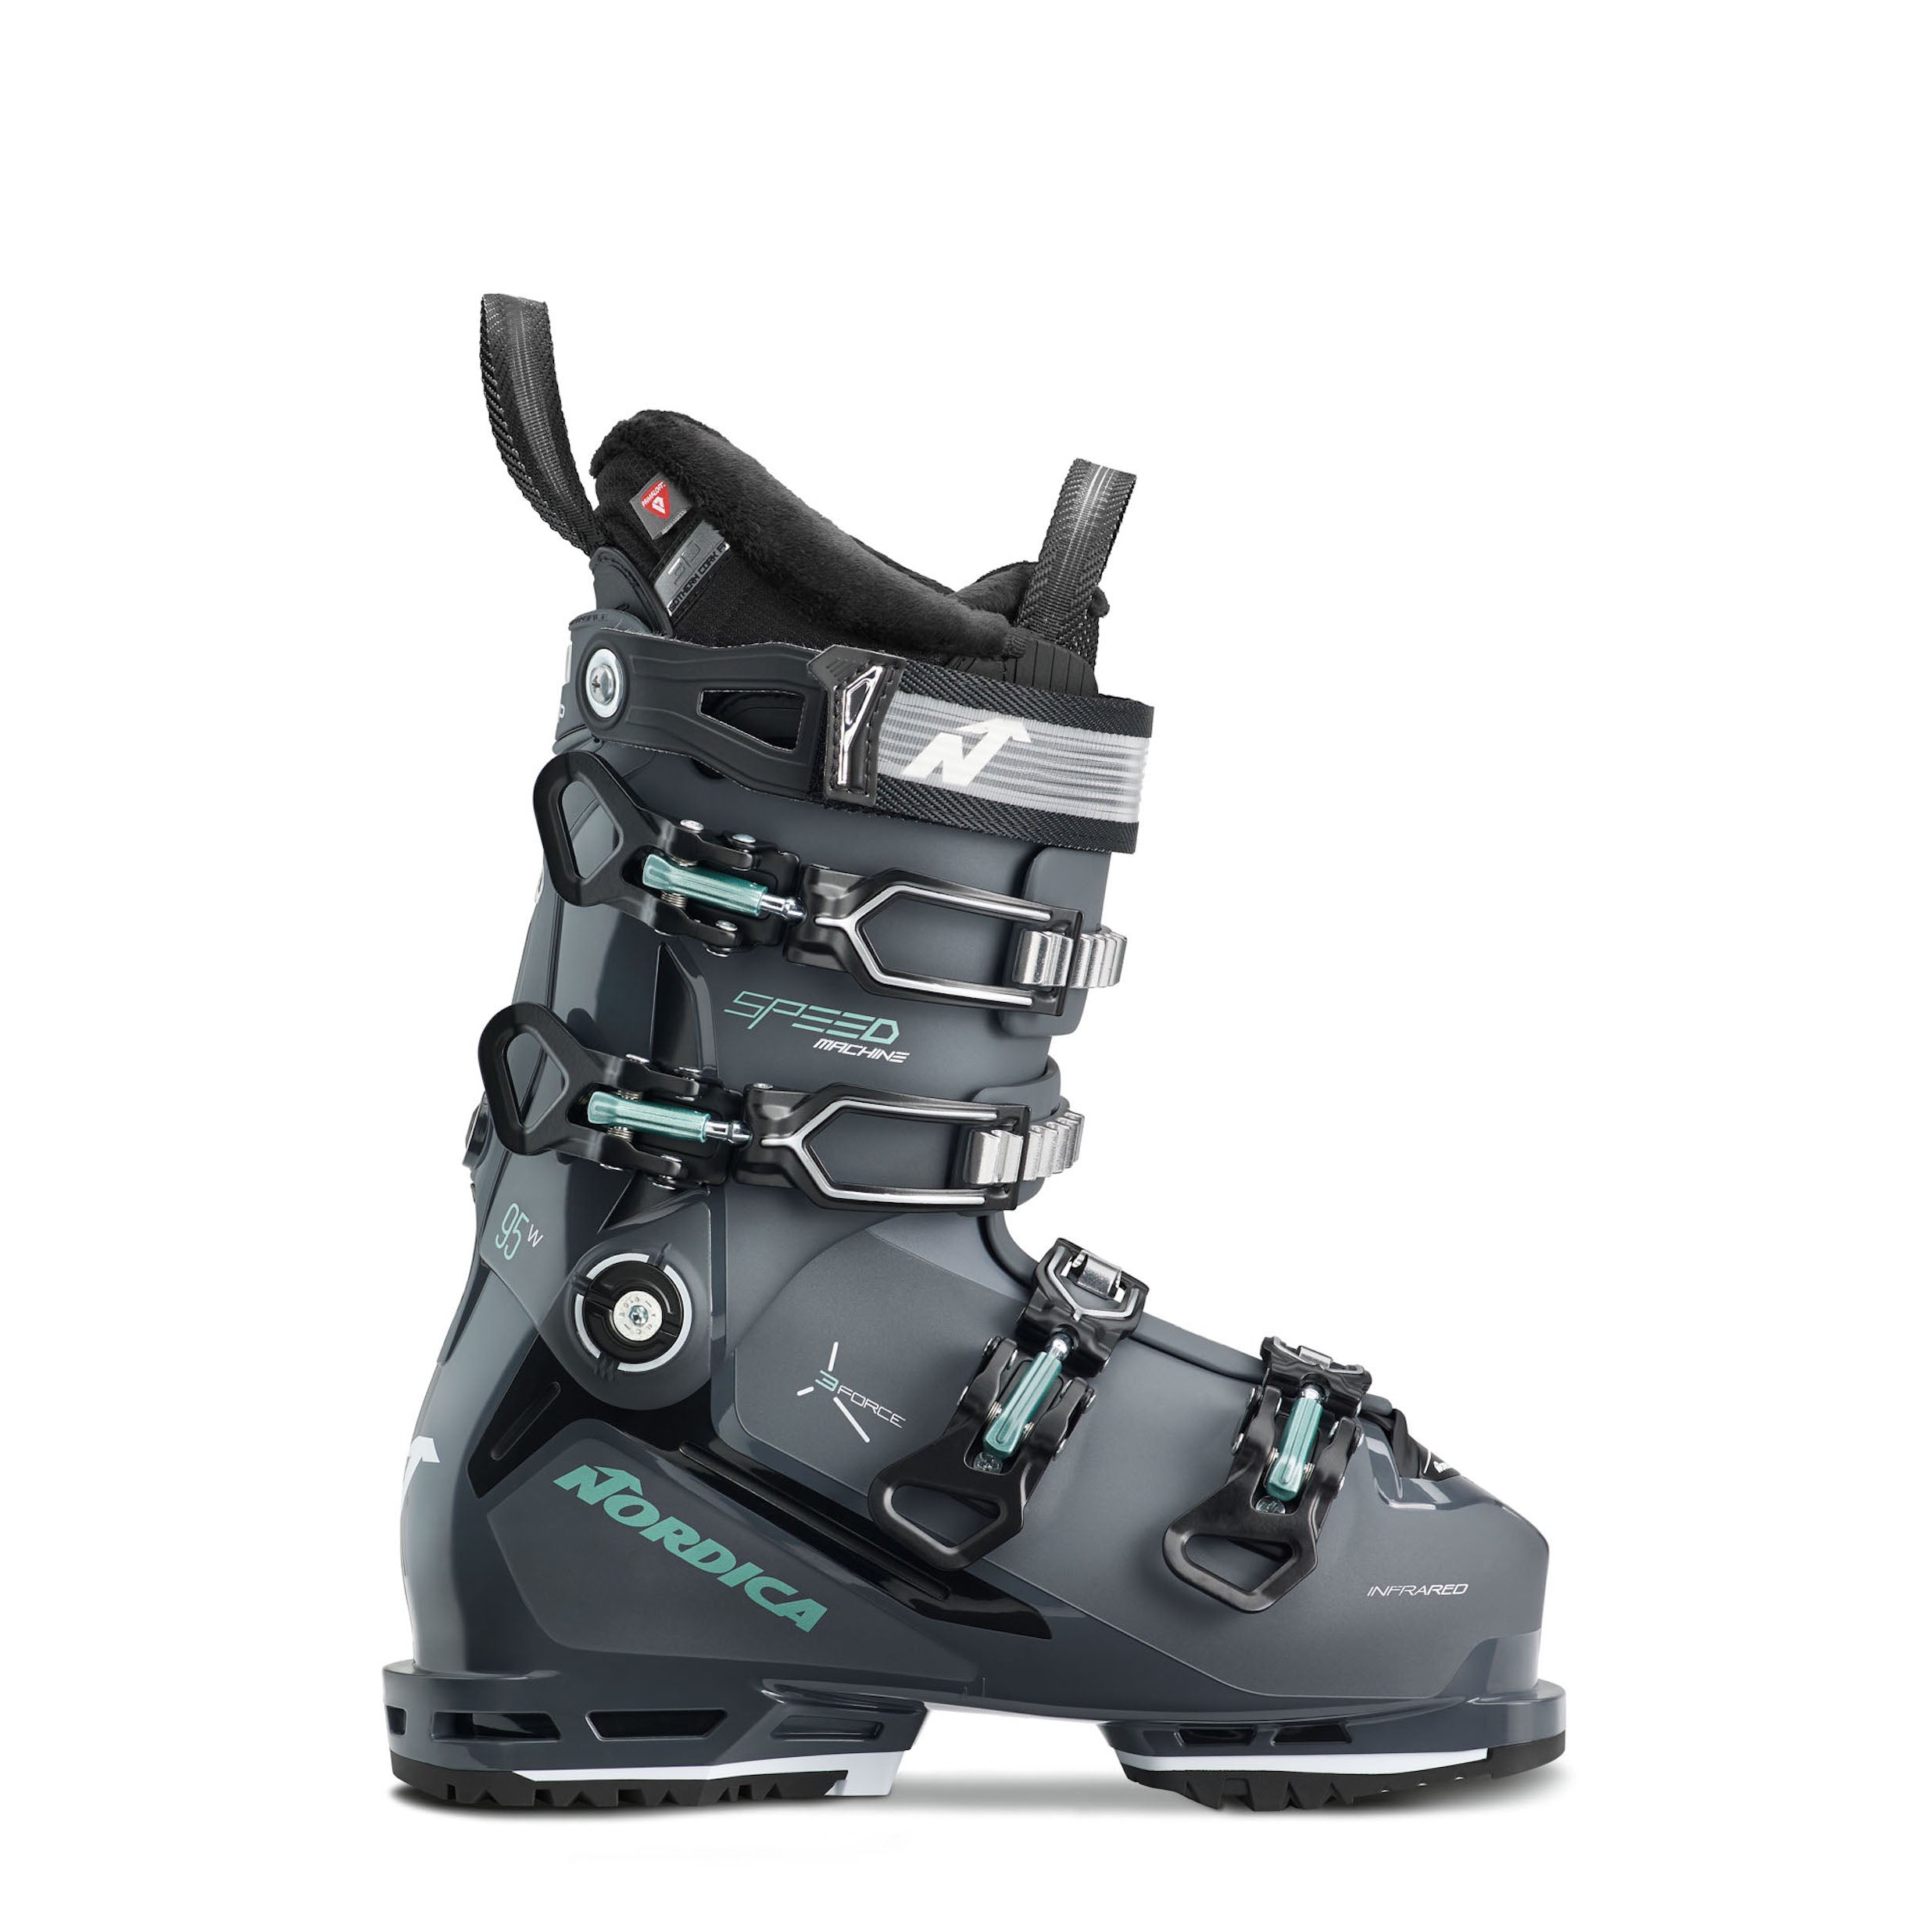 Women's Nordica Speedmachine 3 95 ski boot in blue-grey with light blue accents.